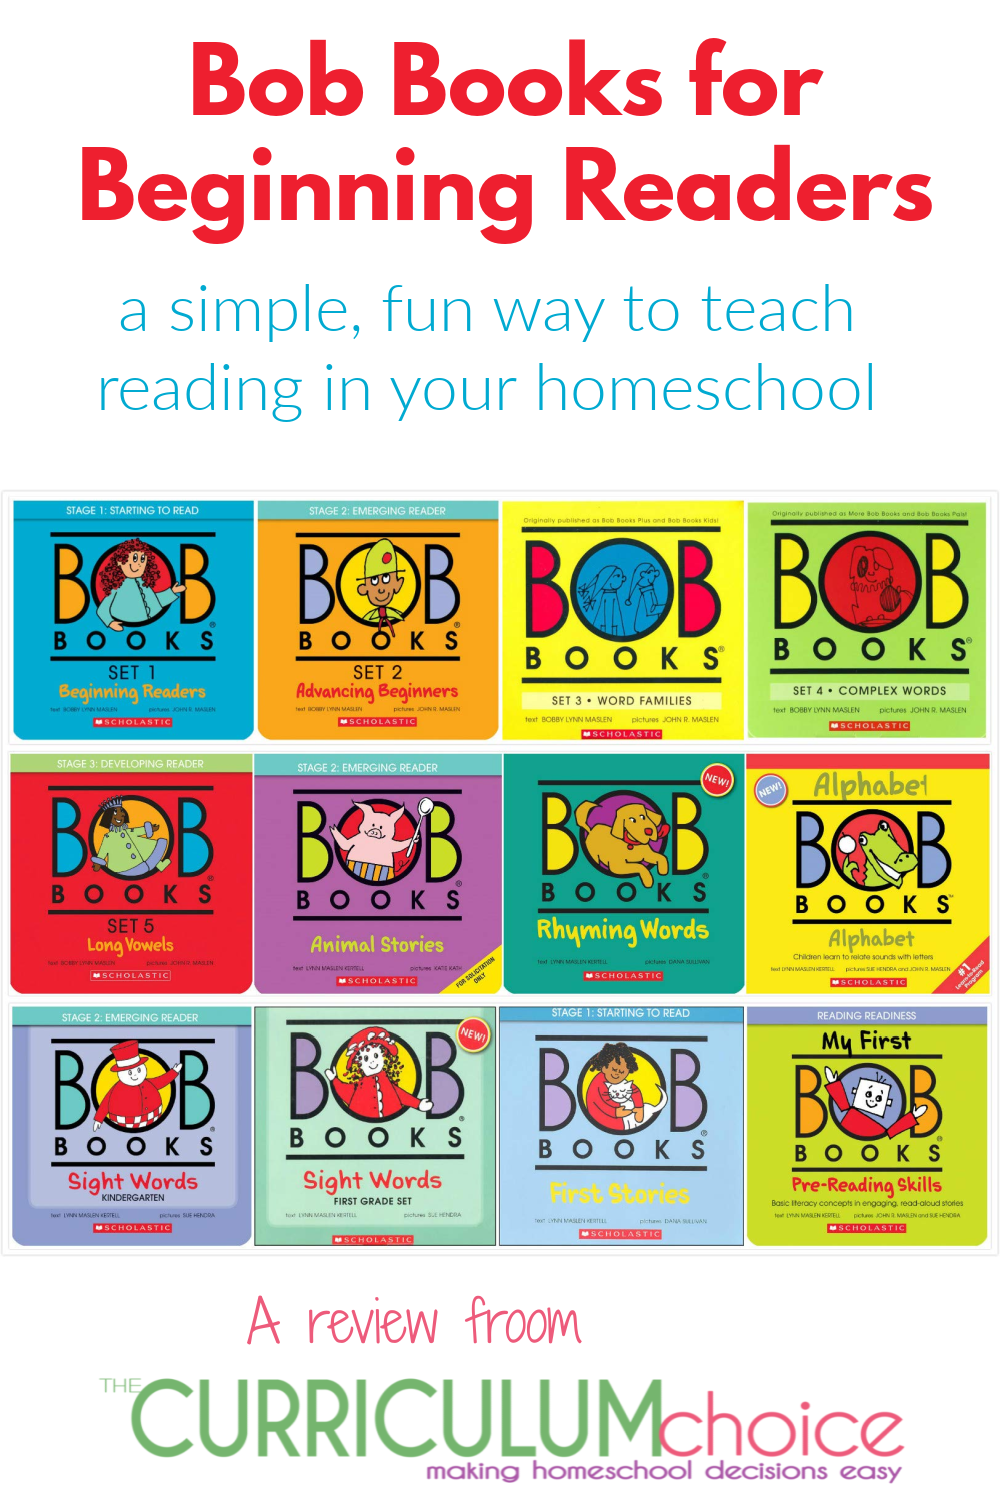 Bob Books first reader series is designed to make helping your child learn to read simple and straightforward, with short words and simple phonics. A review from The Curriculum Choice